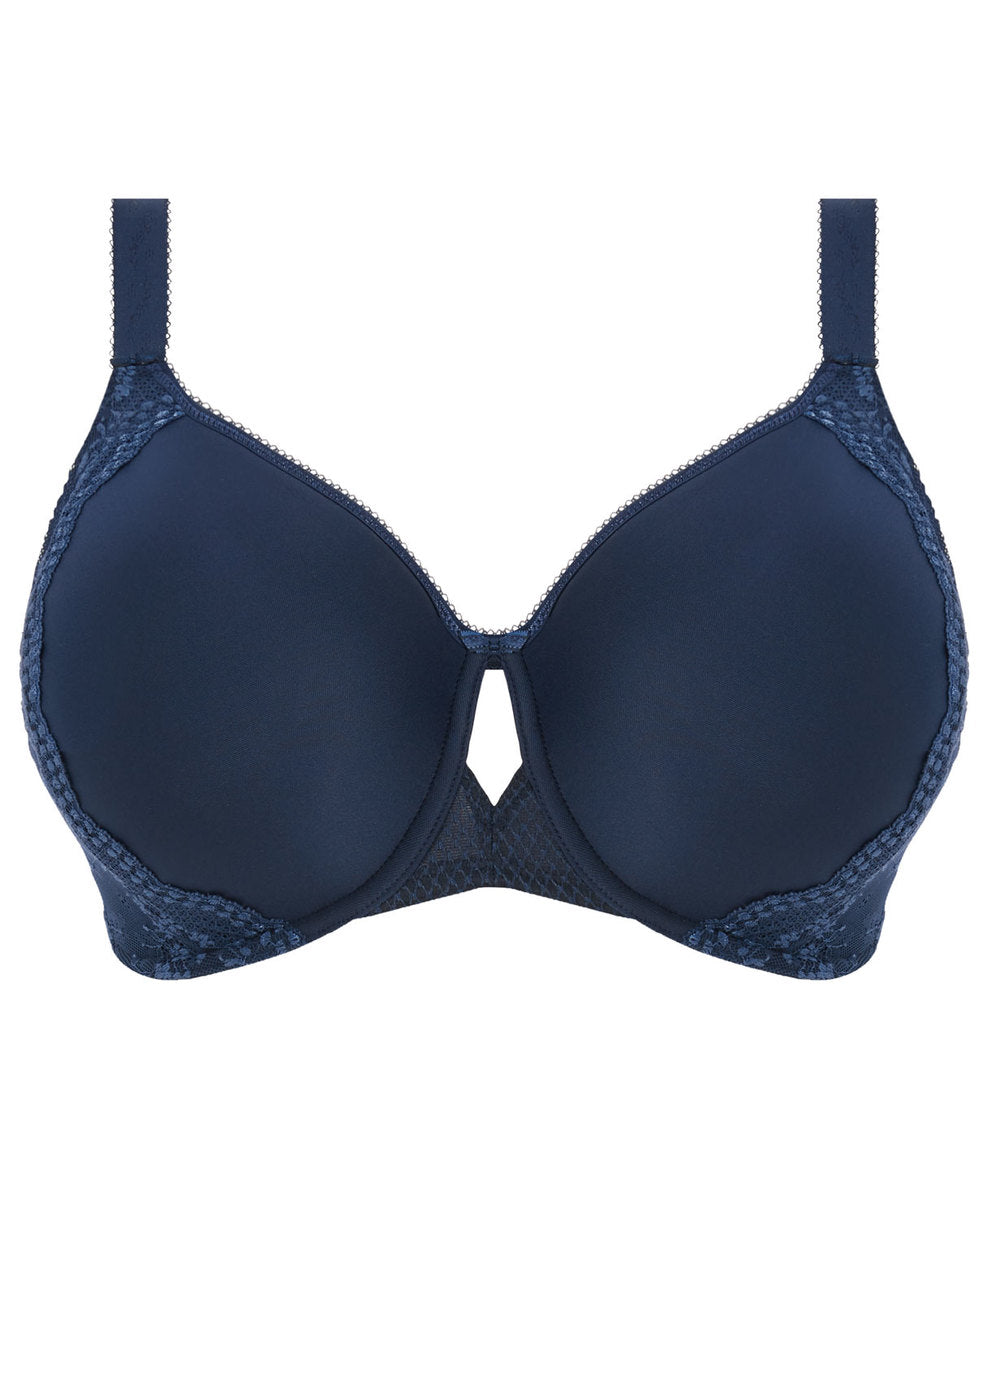 PANACHE - FREE EXPRESS SHIPPING -Cari Moulded Spacer Bra- Blue